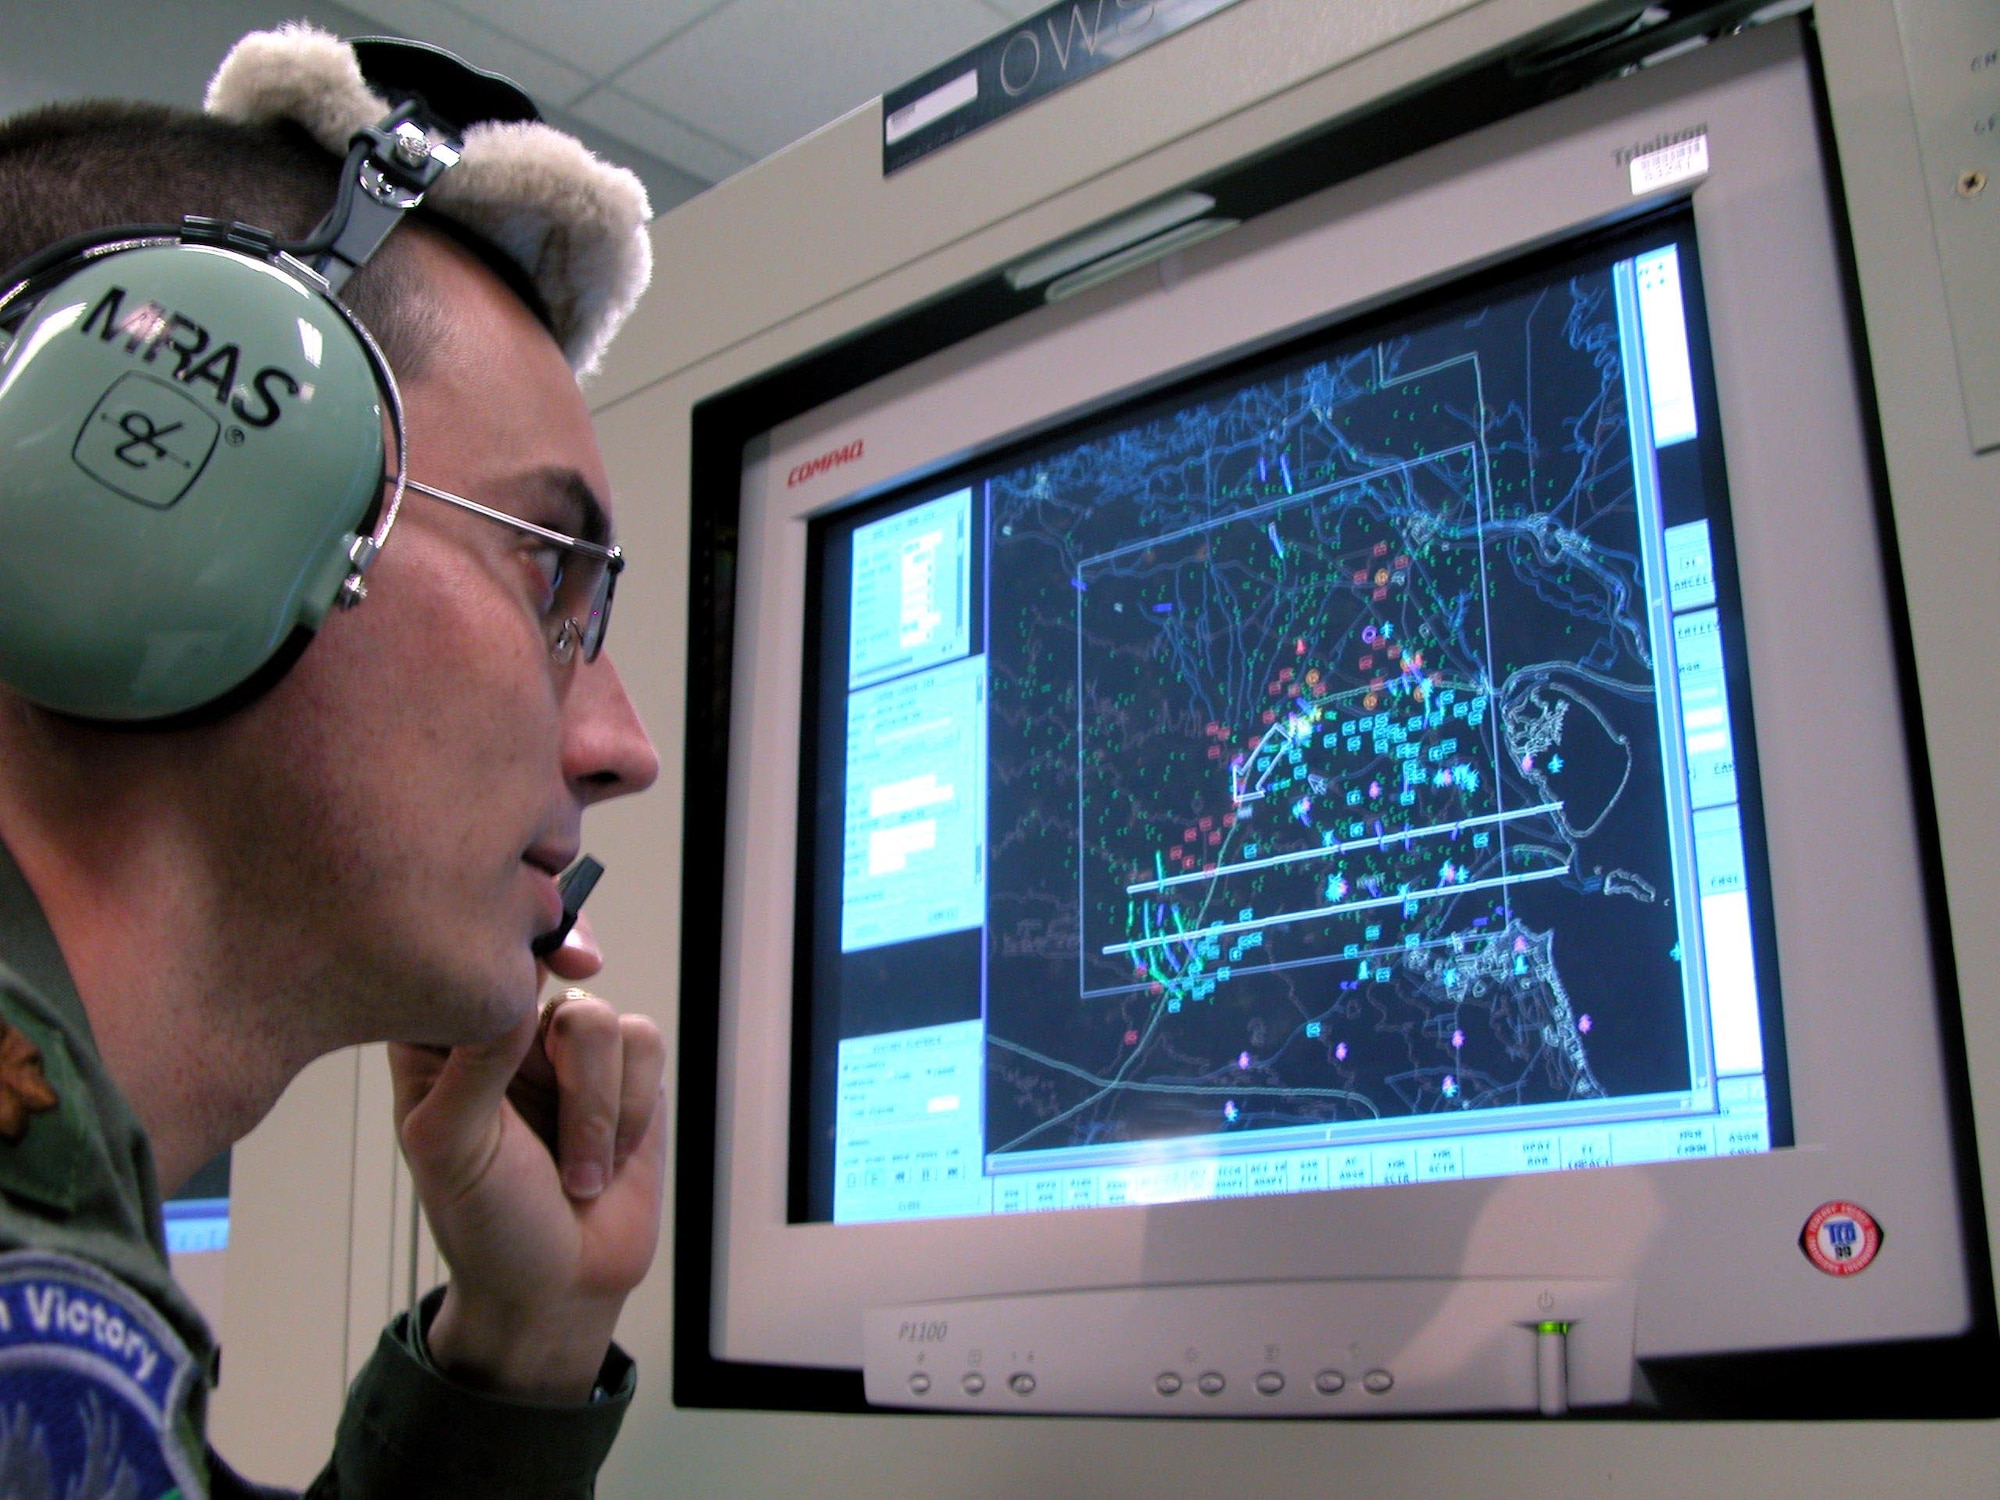 ROBINS AIR FORCE BASE, Ga. (AFPN) -- Maj. Michael Mras, sensor management officer, monitors activity while sitting at an operator workstation.  Mras is one of the many 116th Air Control Wing airmen who detect enemy ground movement and relay the information to forces on the ground and other airborne assets.  (U.S. Air Force photo by Sue Sapp)

